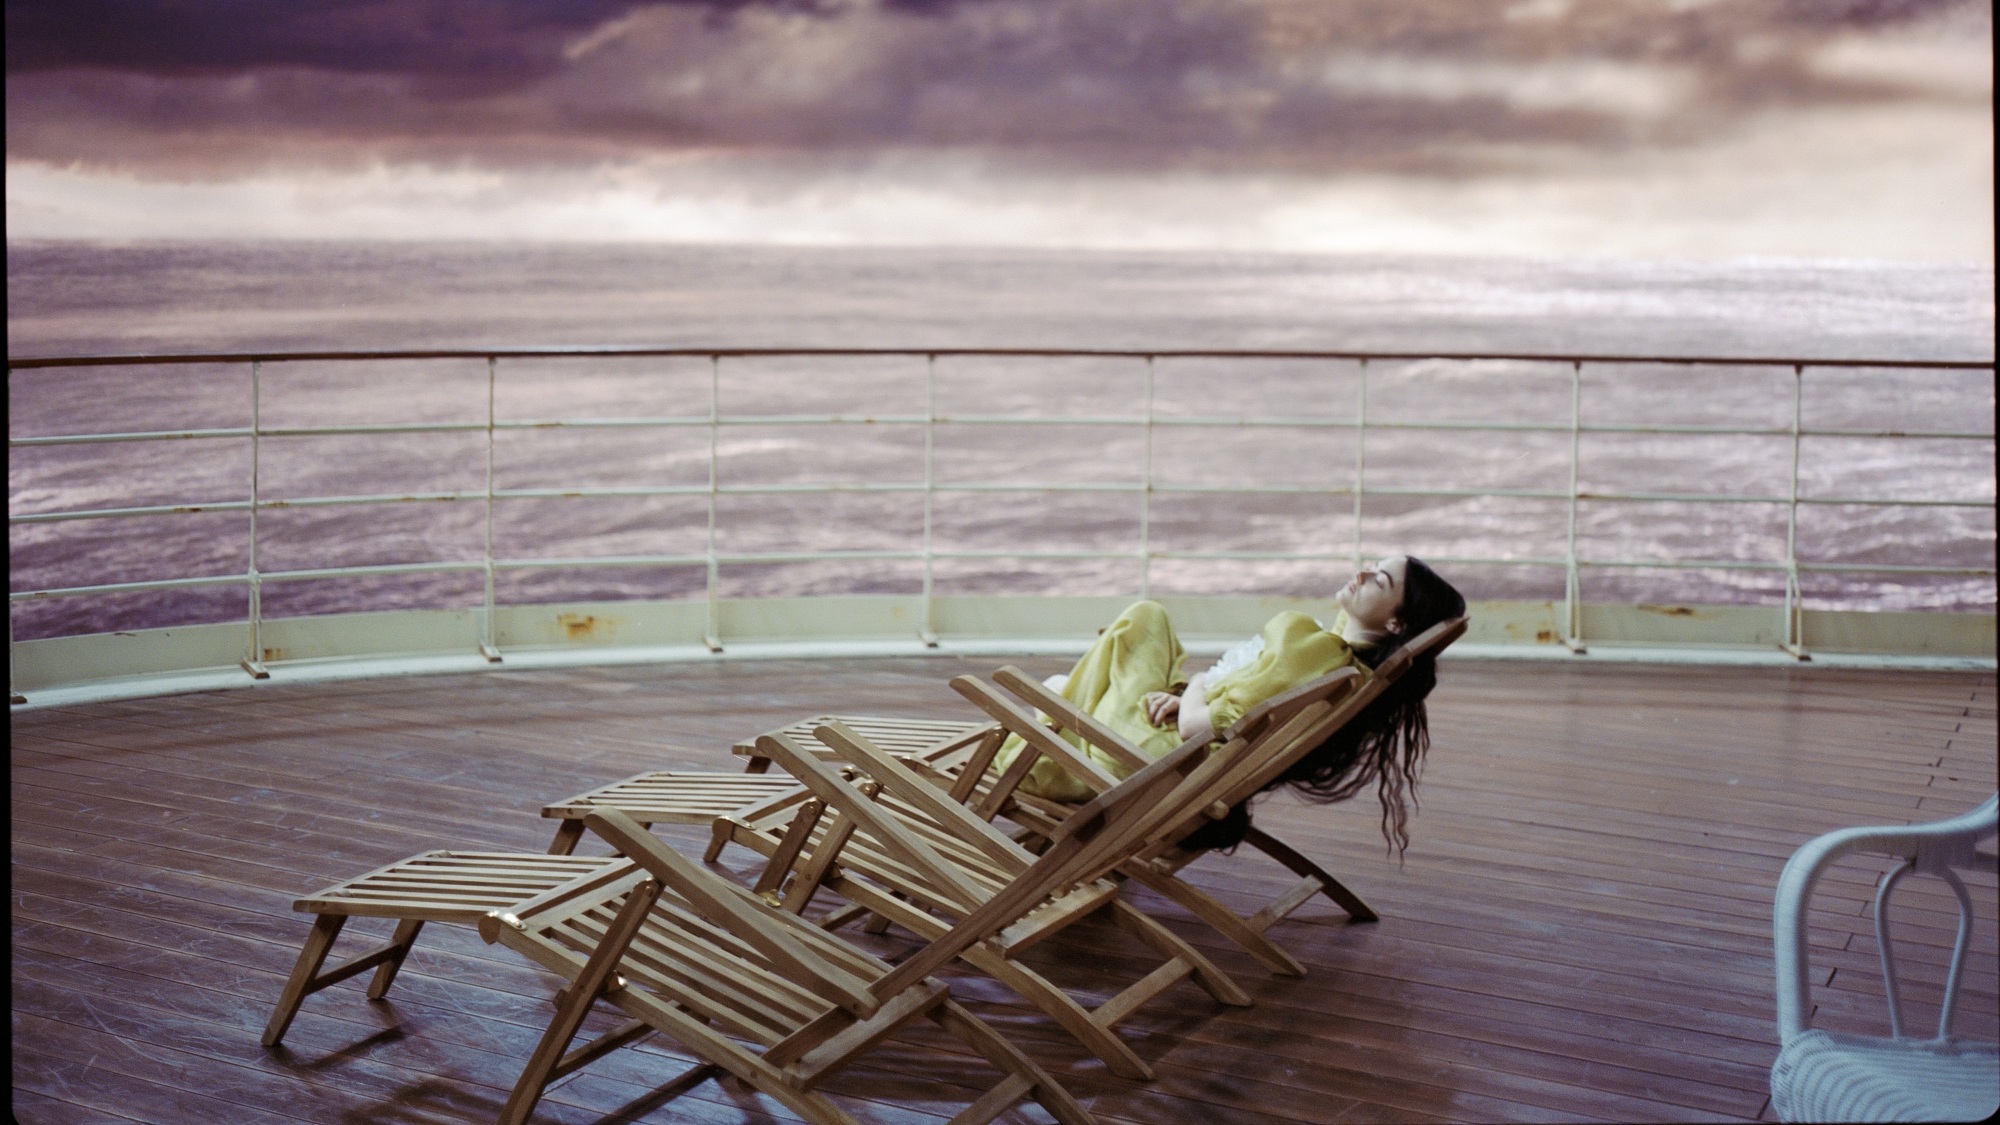 A woman with long black hair and wearing a yellow dress lounges on a chair on the deck of a ship.